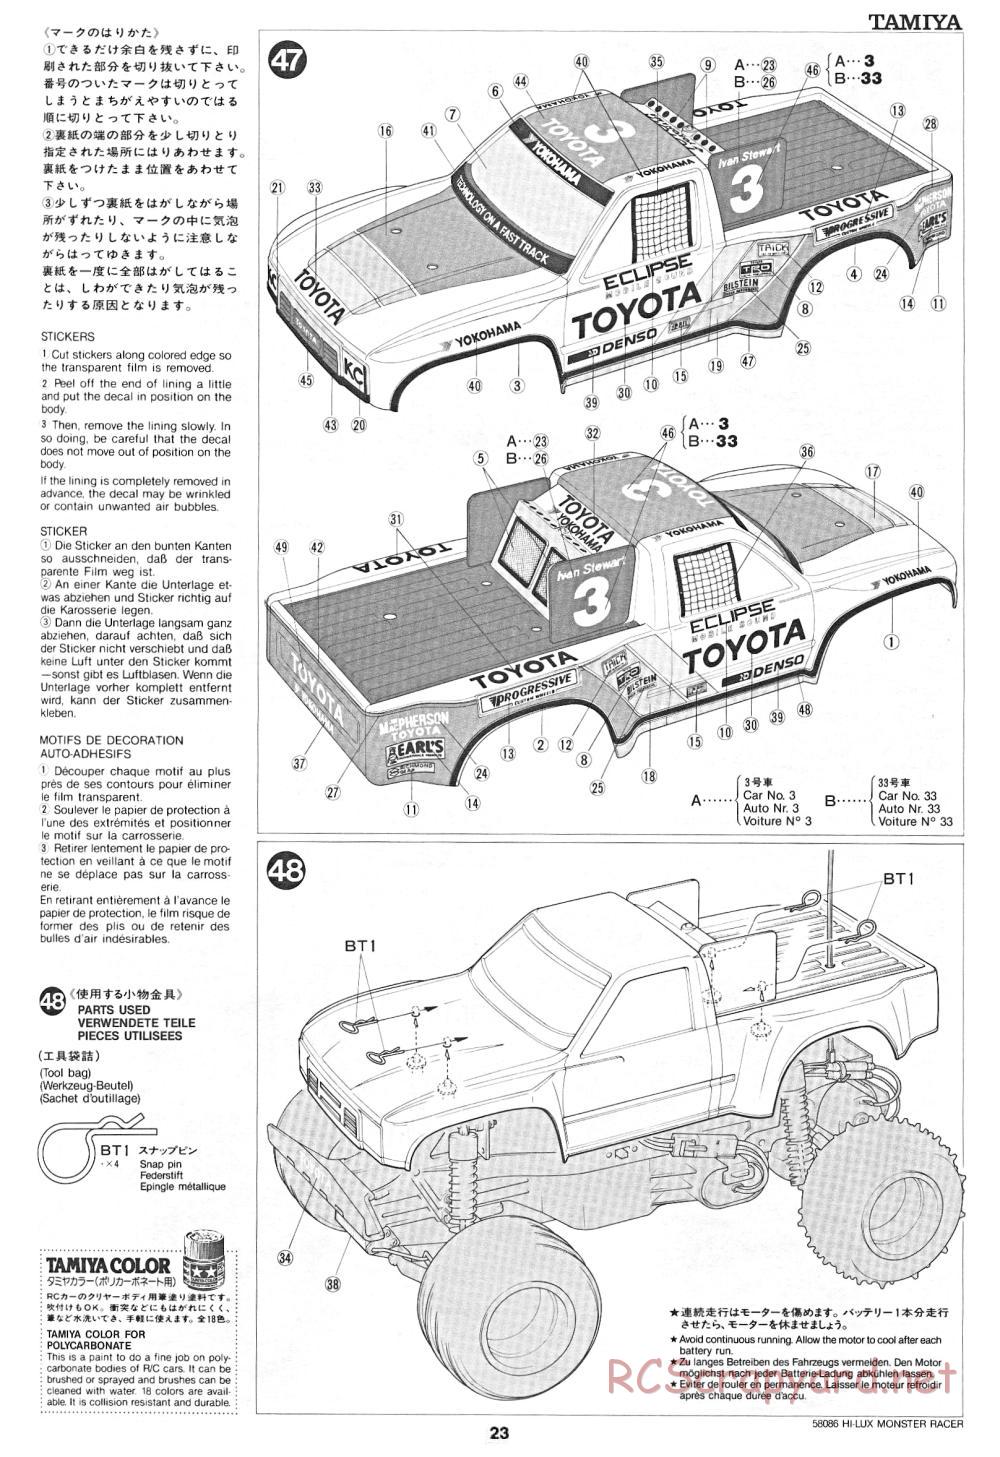 Tamiya - Toyota Hilux Monster Racer - 58086 - Manual - Page 23